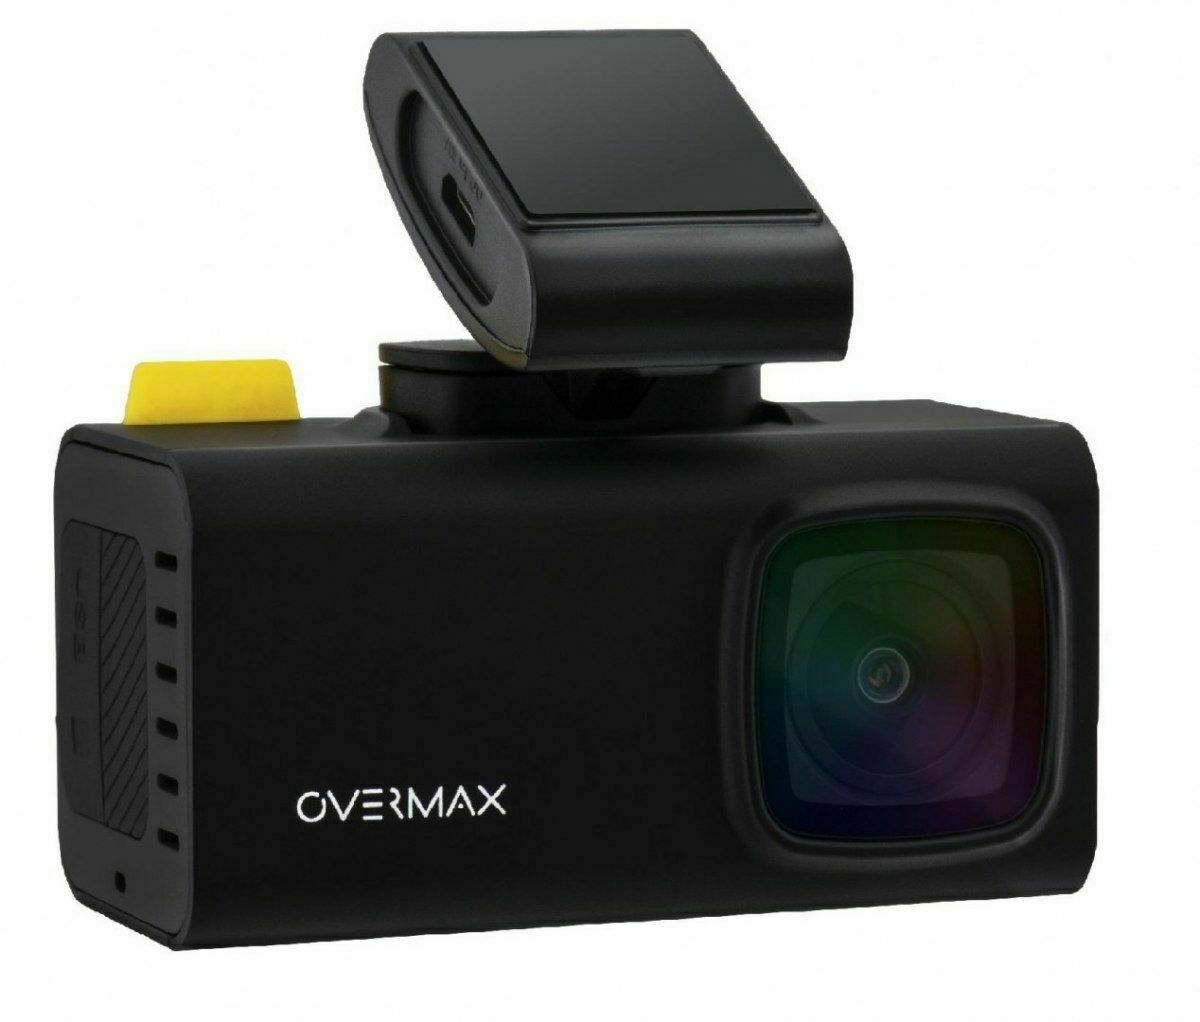 Overmax Camroad 7.0